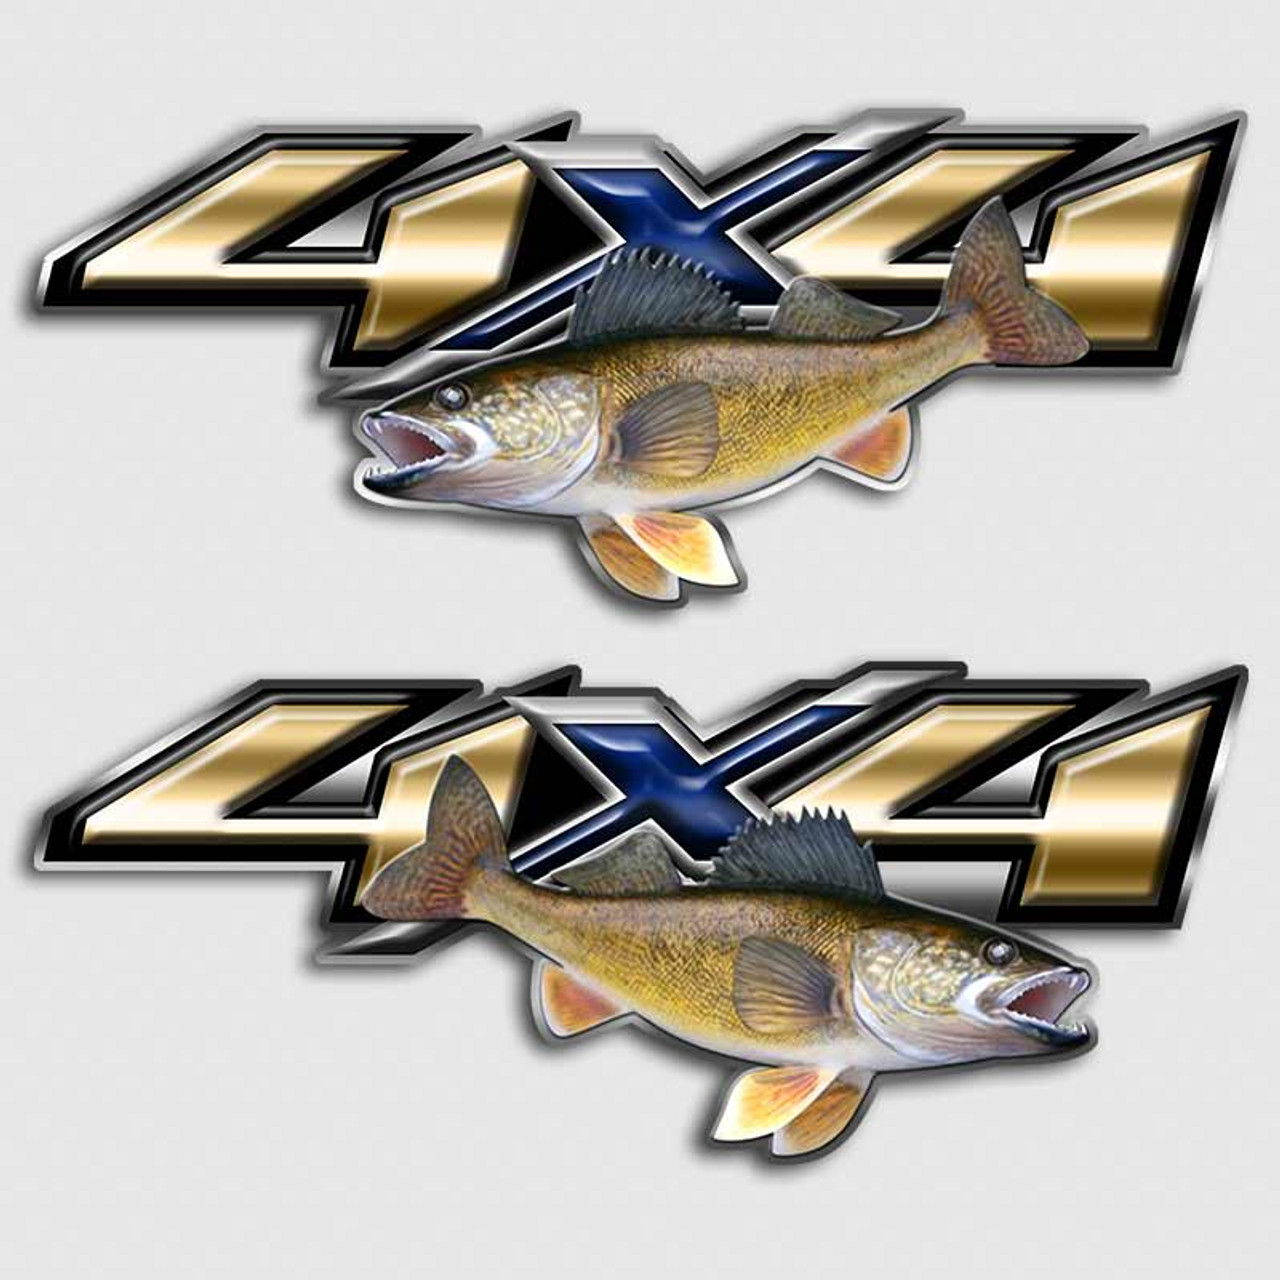 https://cdn11.bigcommerce.com/s-45cfc/images/stencil/1280x1280/products/57/5637/4x4-fishing-truck-decal-walleye-golden-erie__28346.1673409202.jpg?c=2